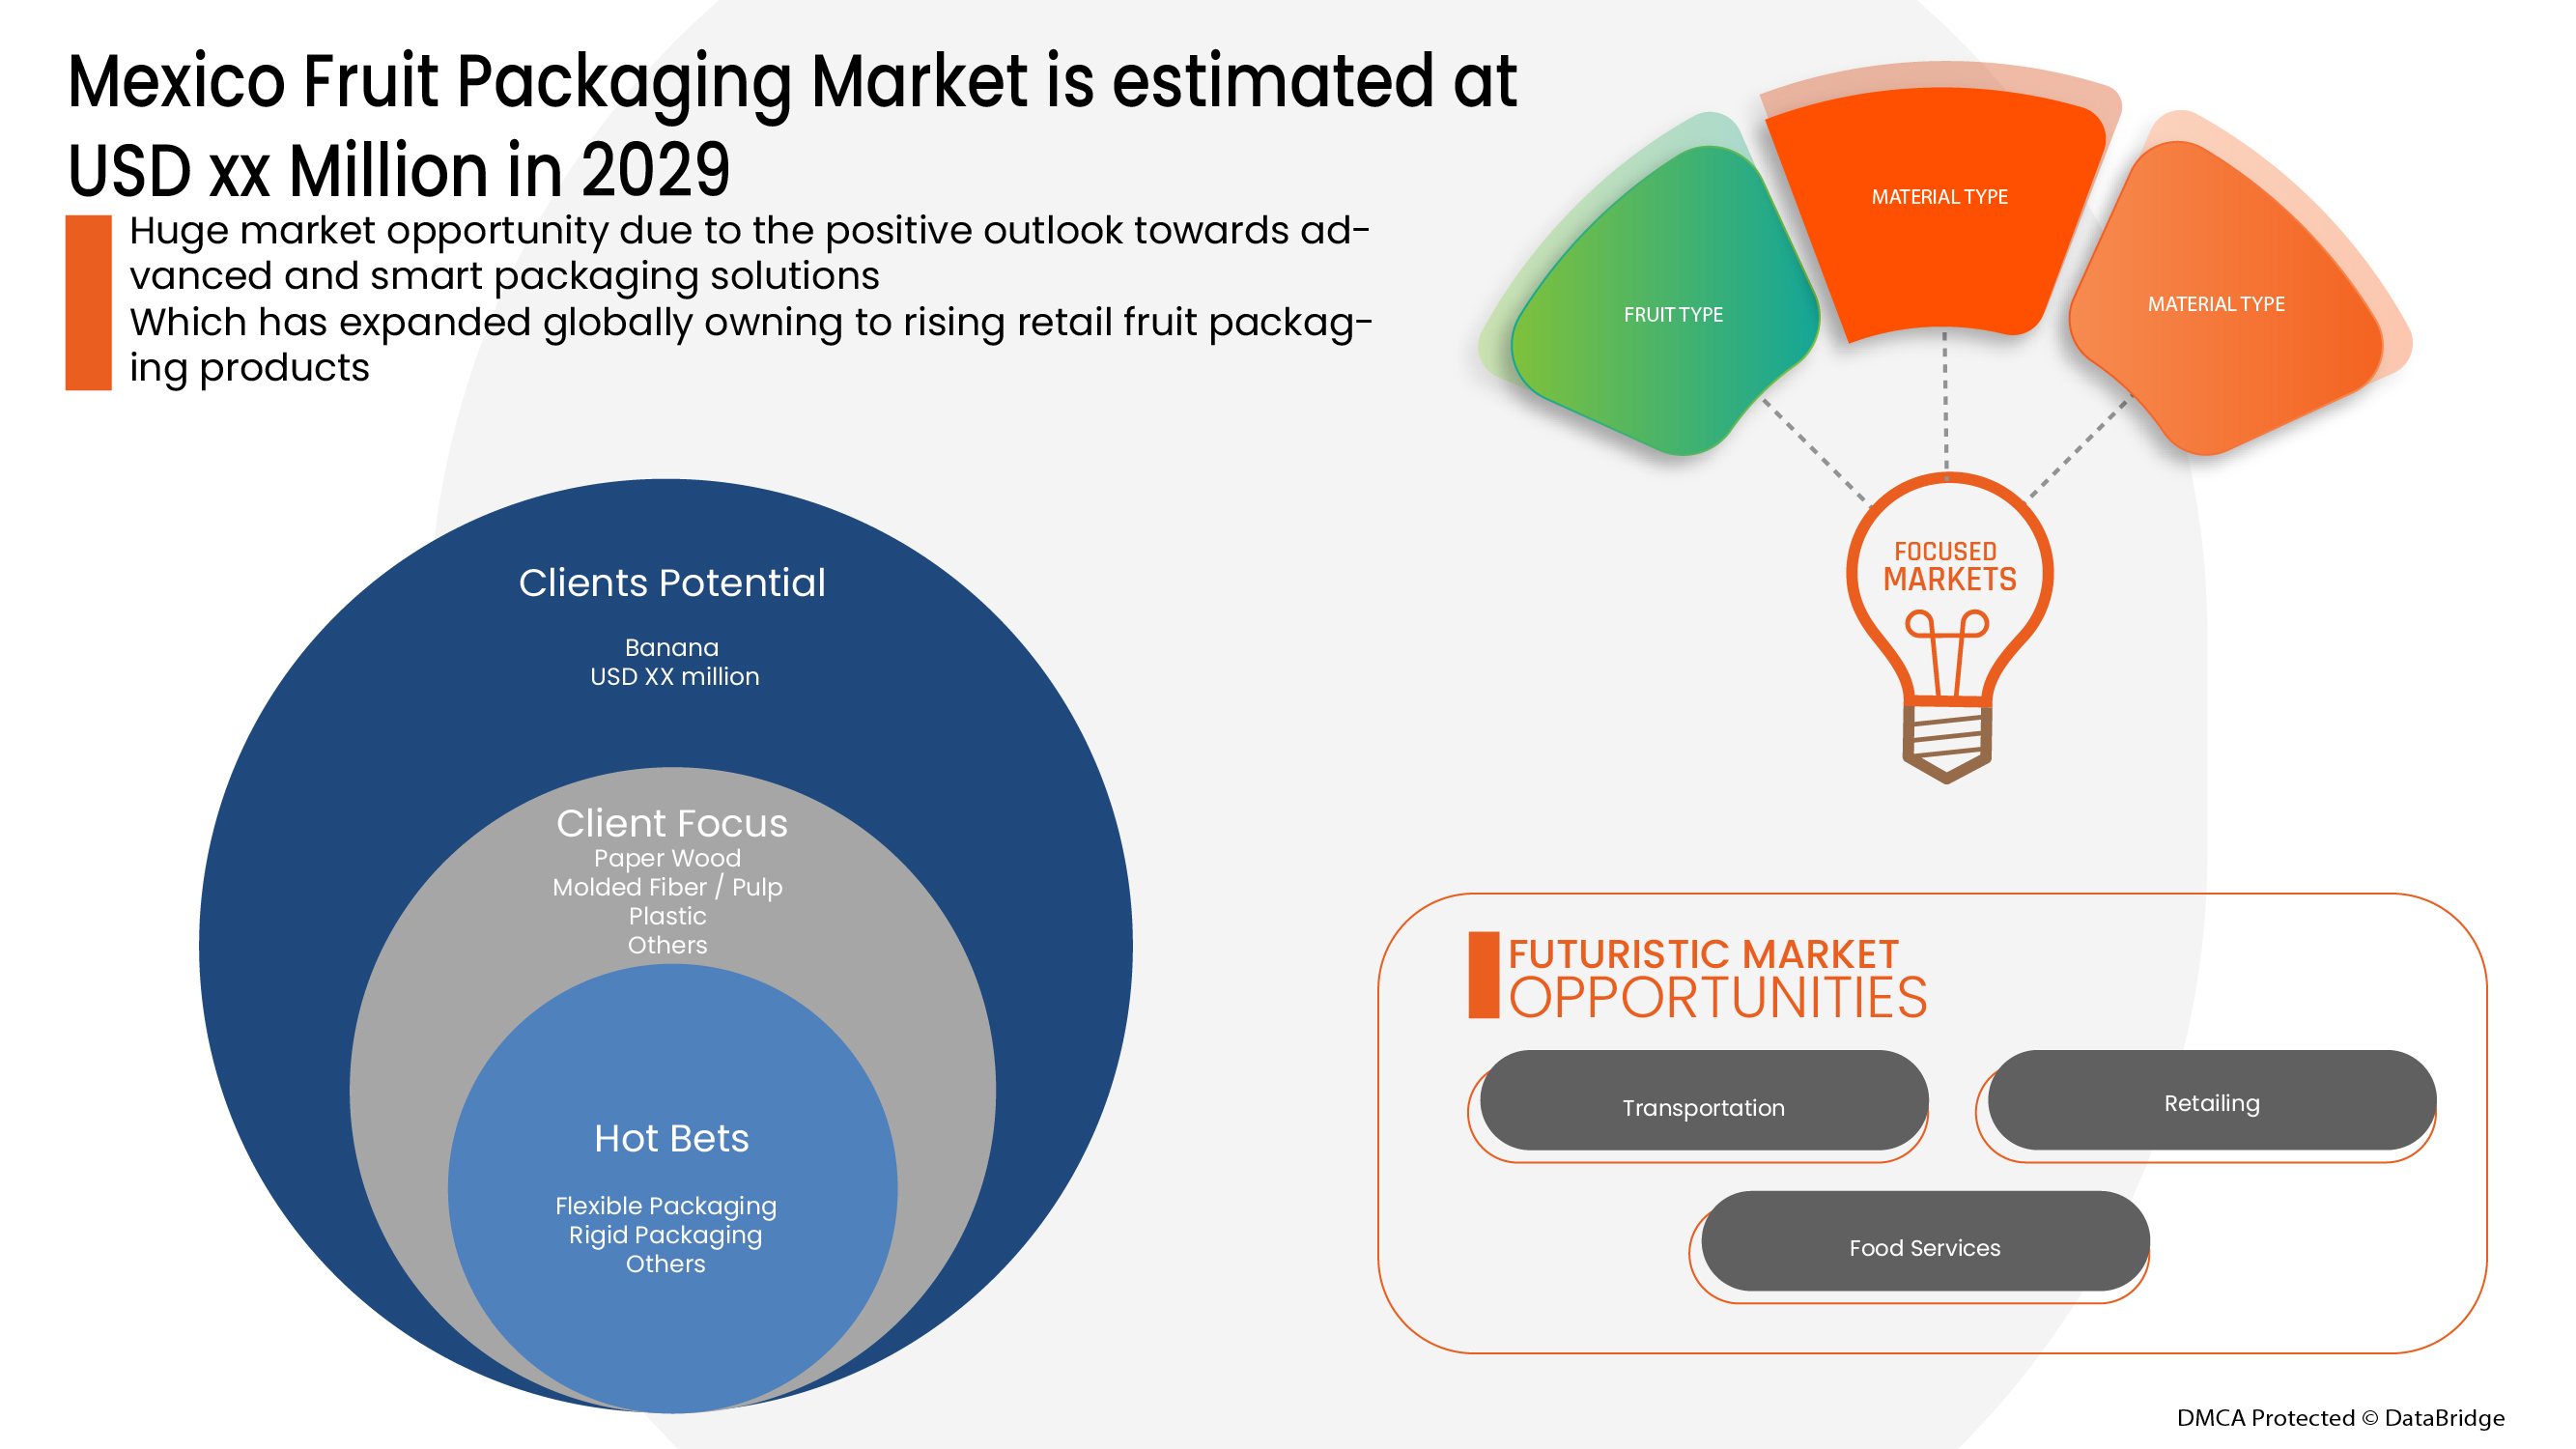 Mexico Fruit Packaging Market